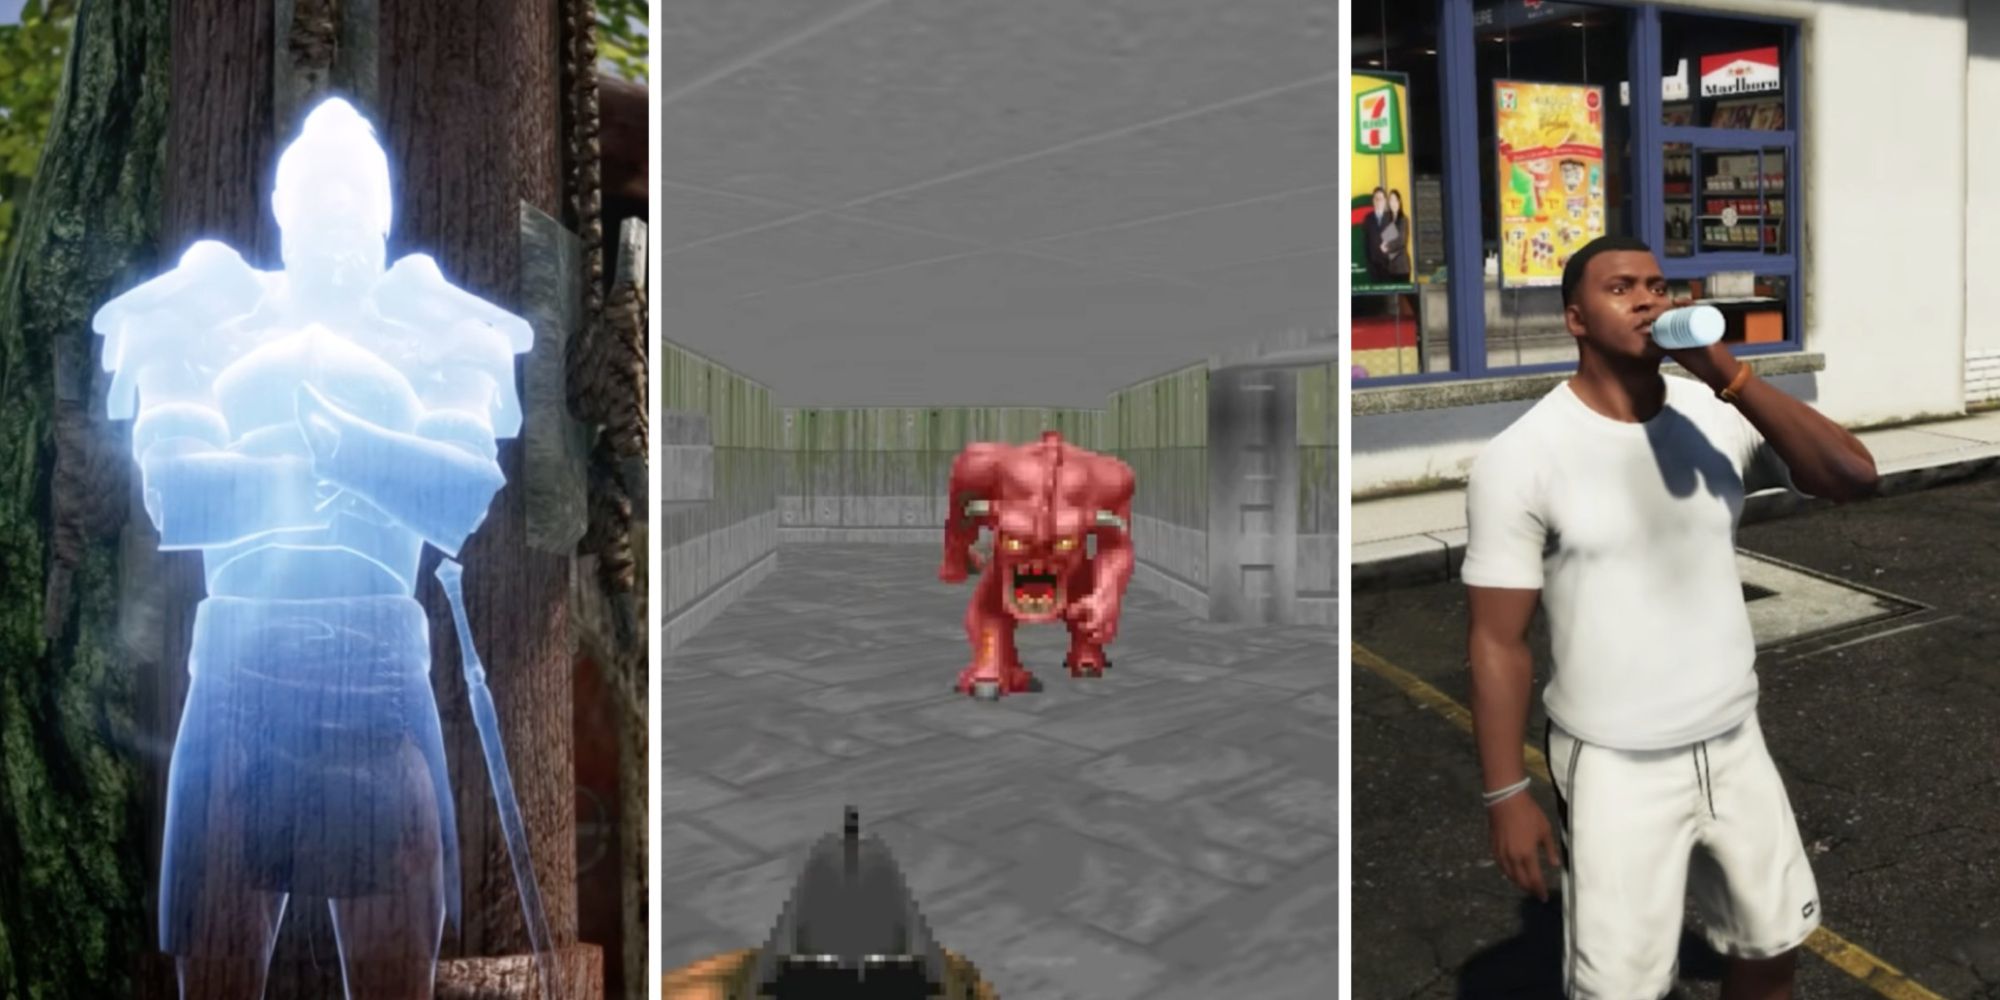 From left to right, a preview of the Grytewake Legend mod in Skyrim, being chased down a corridor by a monster in 1993's Doom, and drinking from a water bottle in Grand Theft Auto V